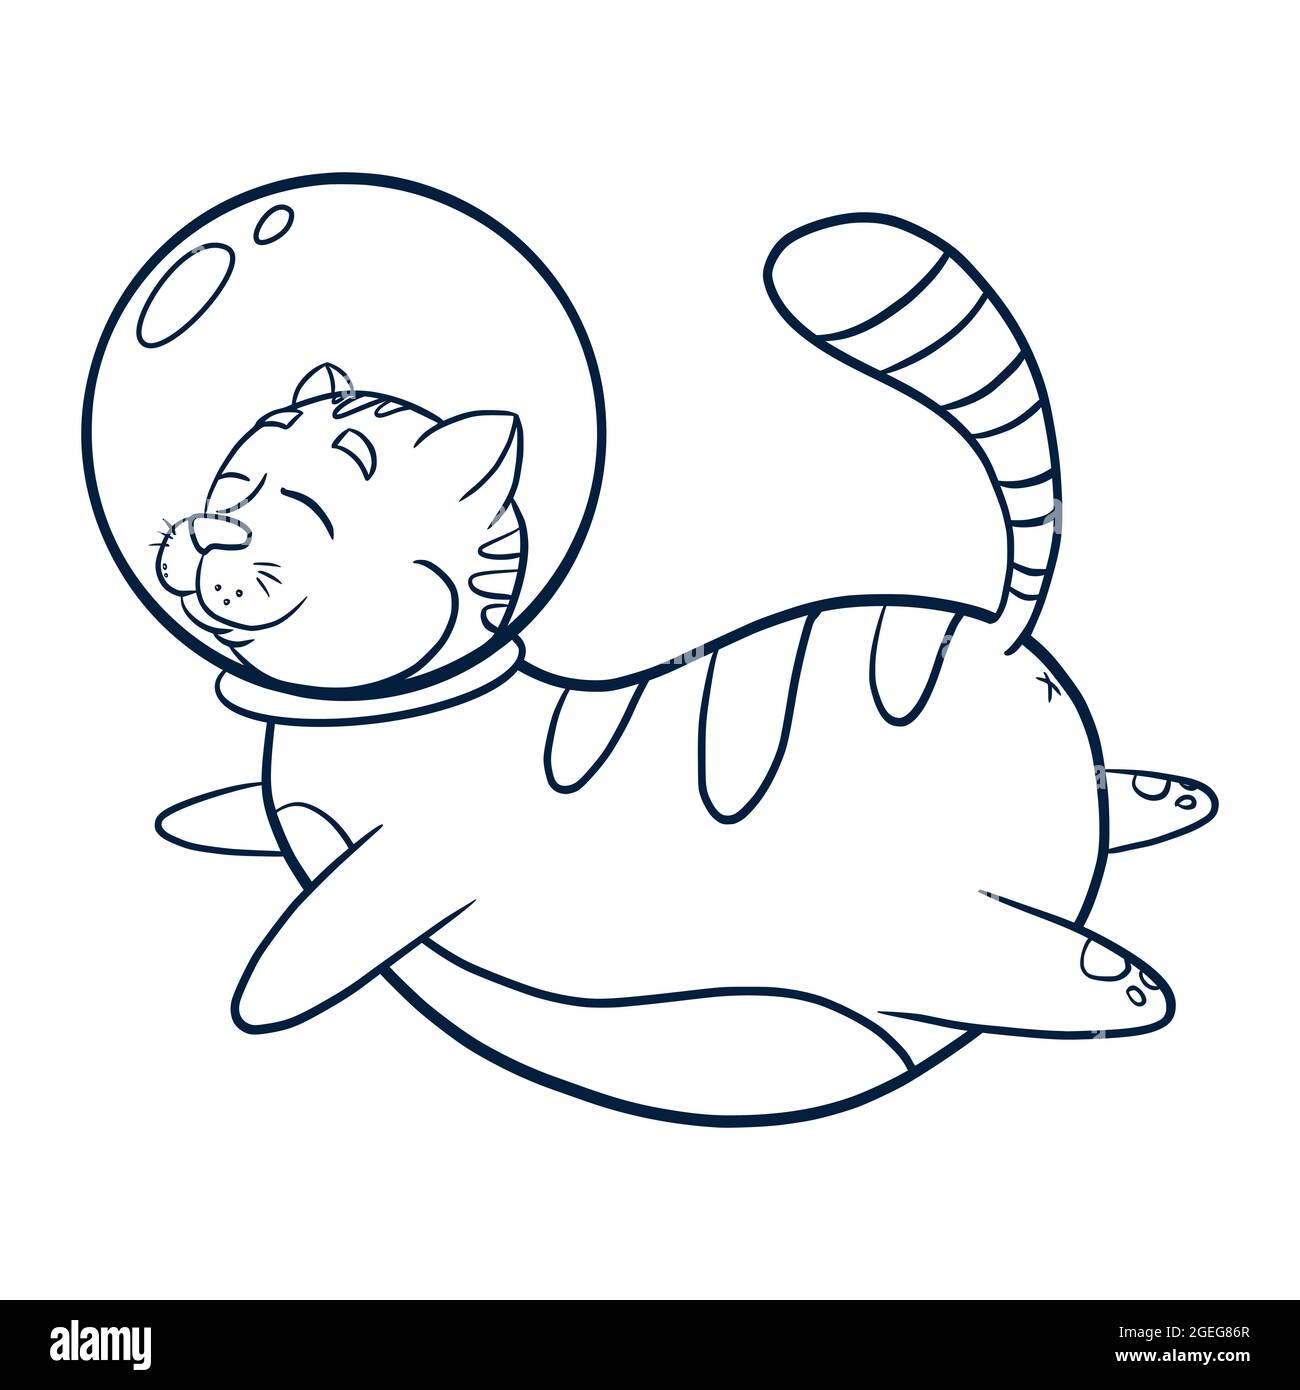 Line Art Cat Astronaut Illustration. Flying cosmic animal icon for kids graphic tees, prints, logo, coloring book and nursery decor Stock Vector